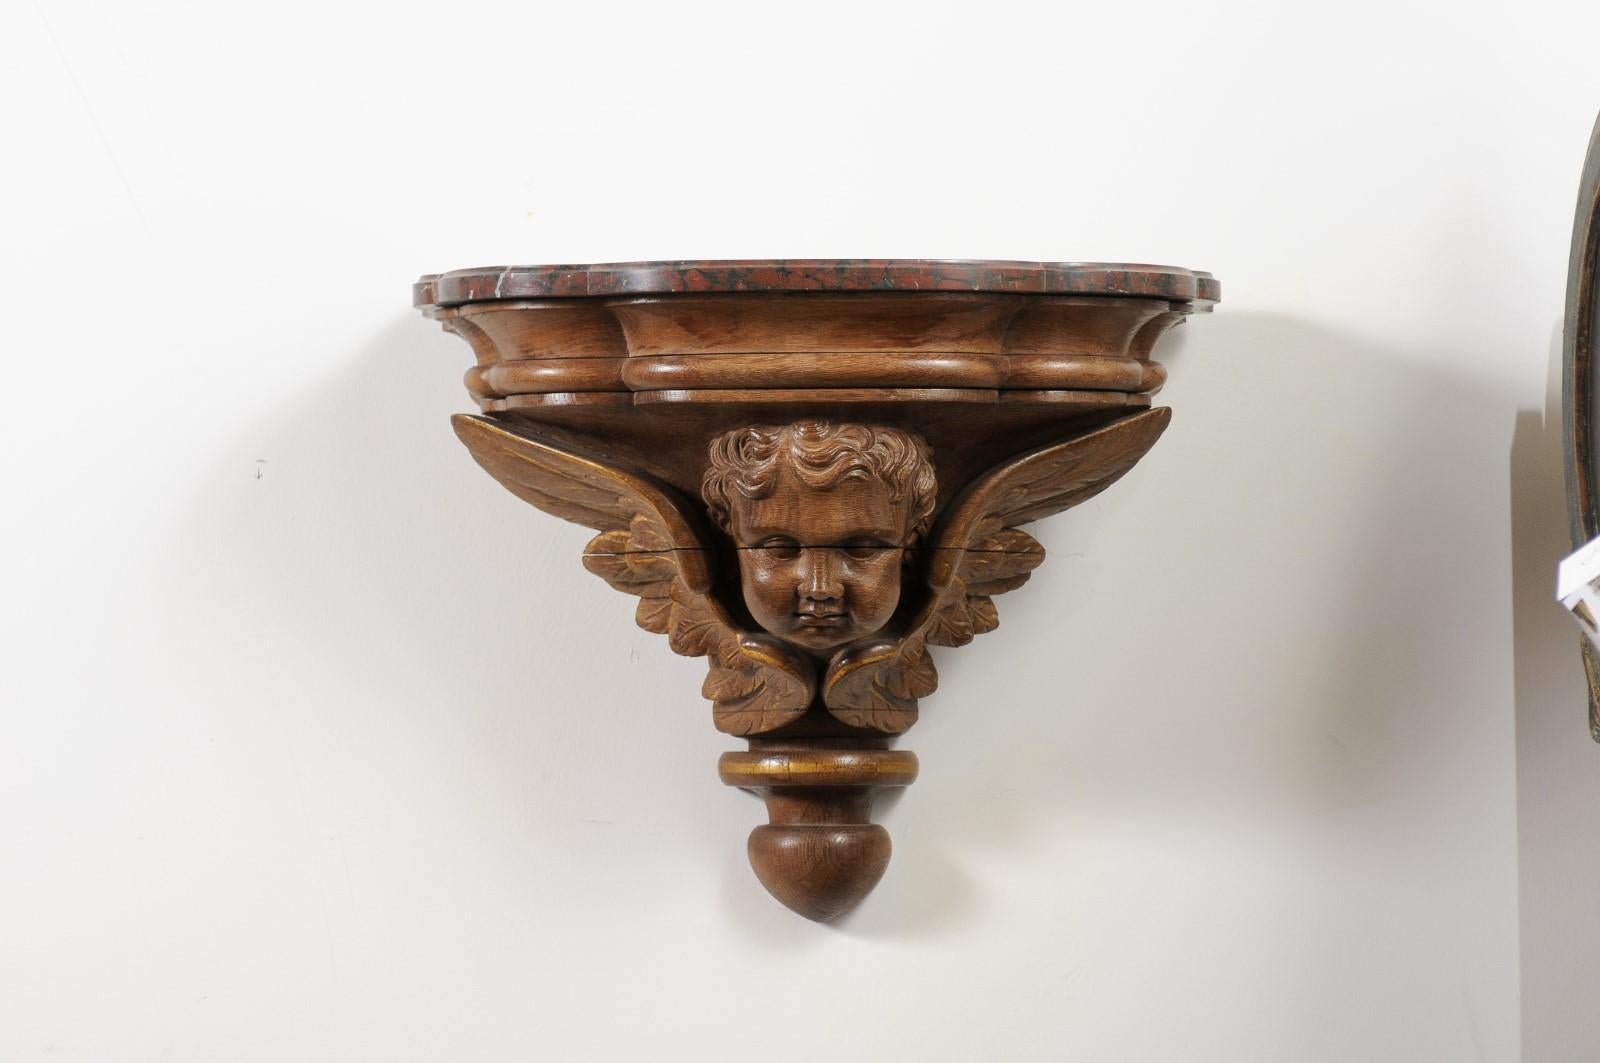 A pair of French carved walnut brackets from the late 19th century, with cherubs and faux marble tops. Created in France during the last quarter of the 19th century, each of this pair of walnut wall consoles features a shaped faux-marble top sitting